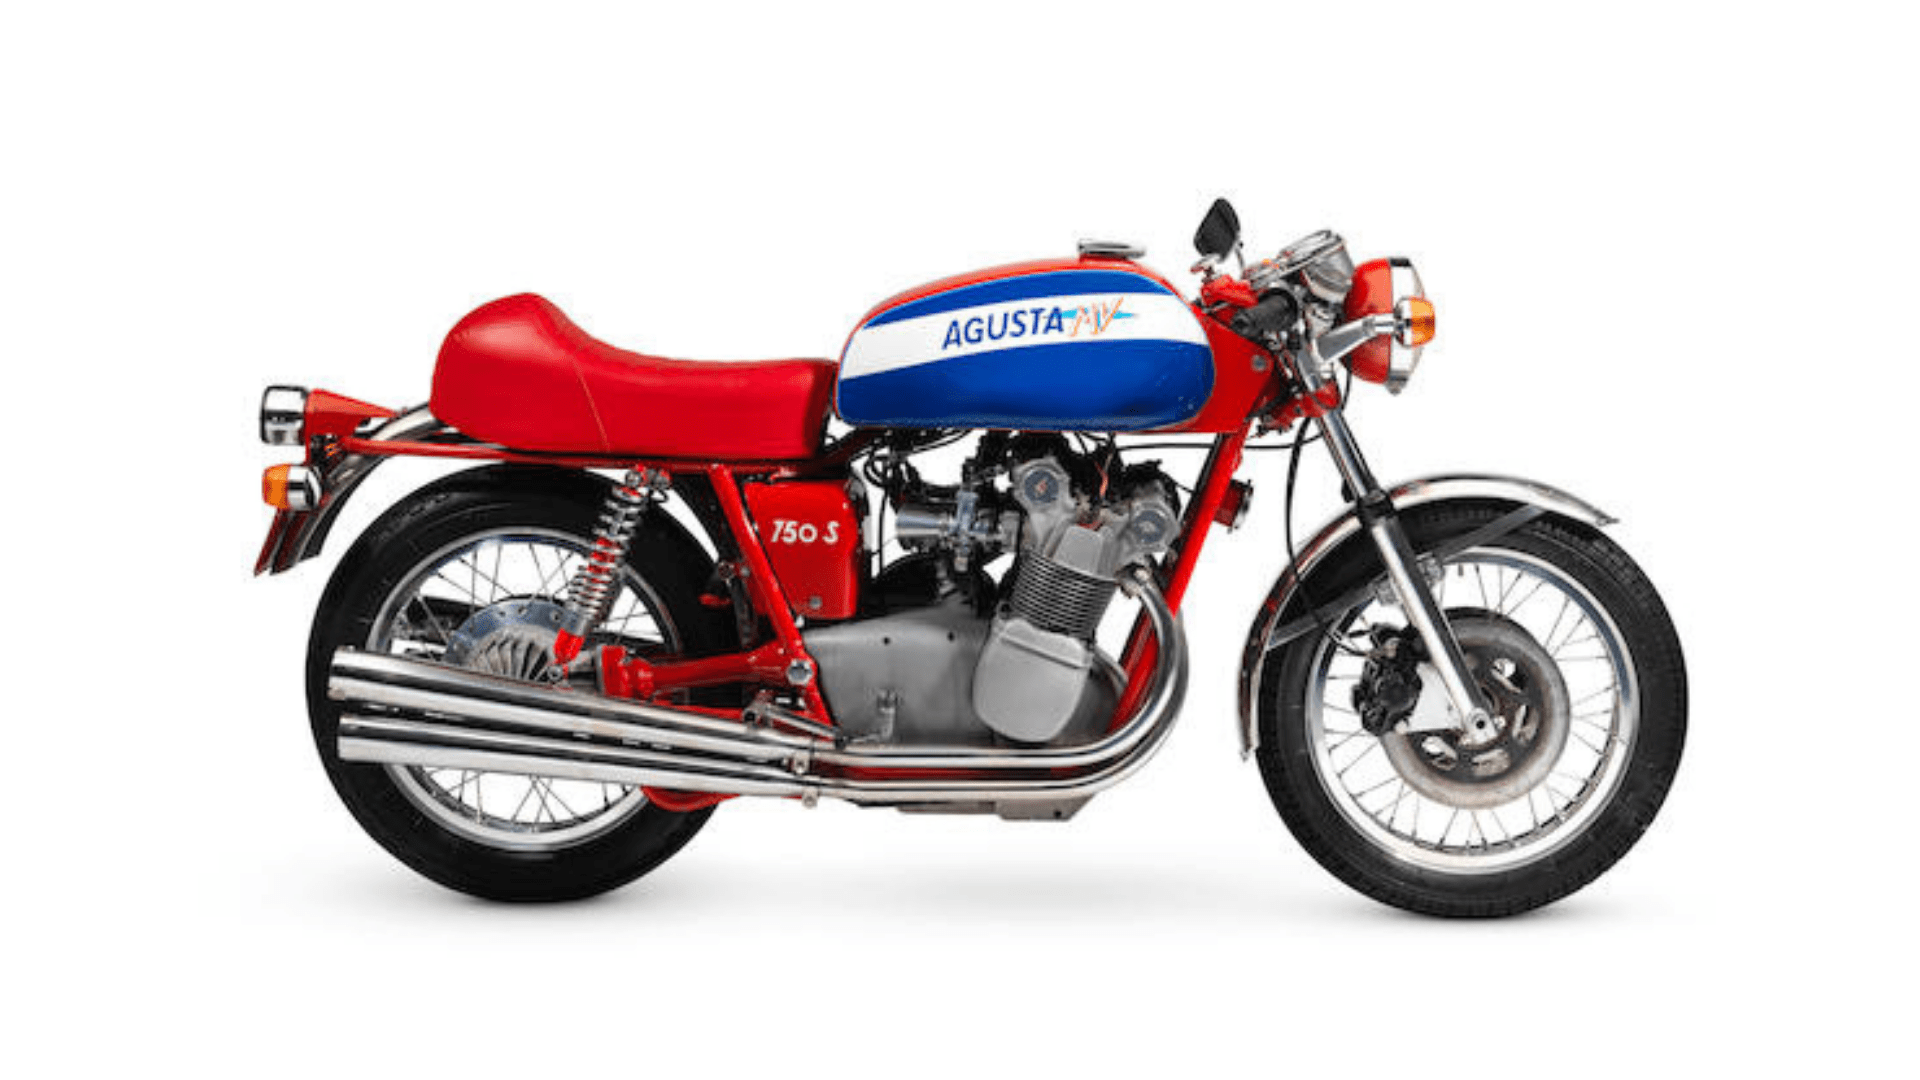 The History of MV Agusta Motorcycles